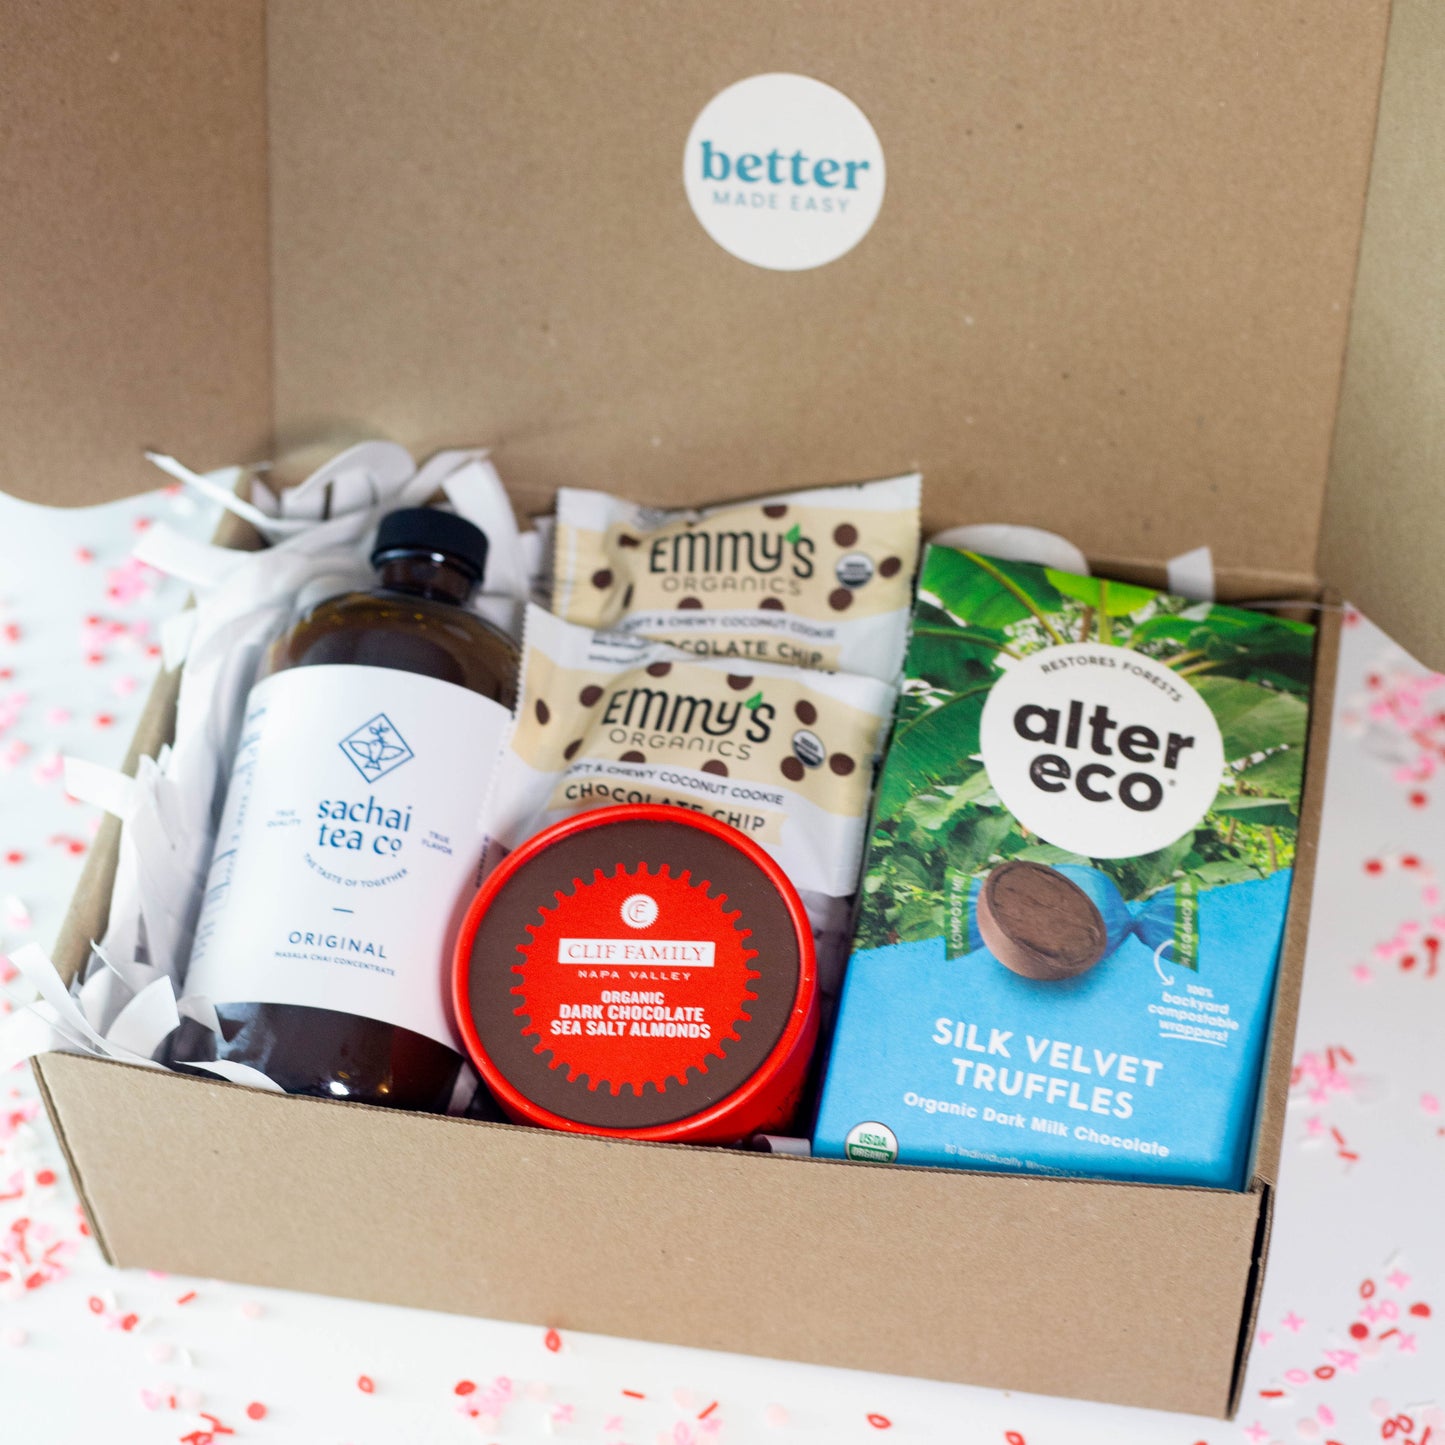 The "B the Change" Certified B Corp Gift Box  better made easy   -better made easy-eco-friendly-sustainable-gifting